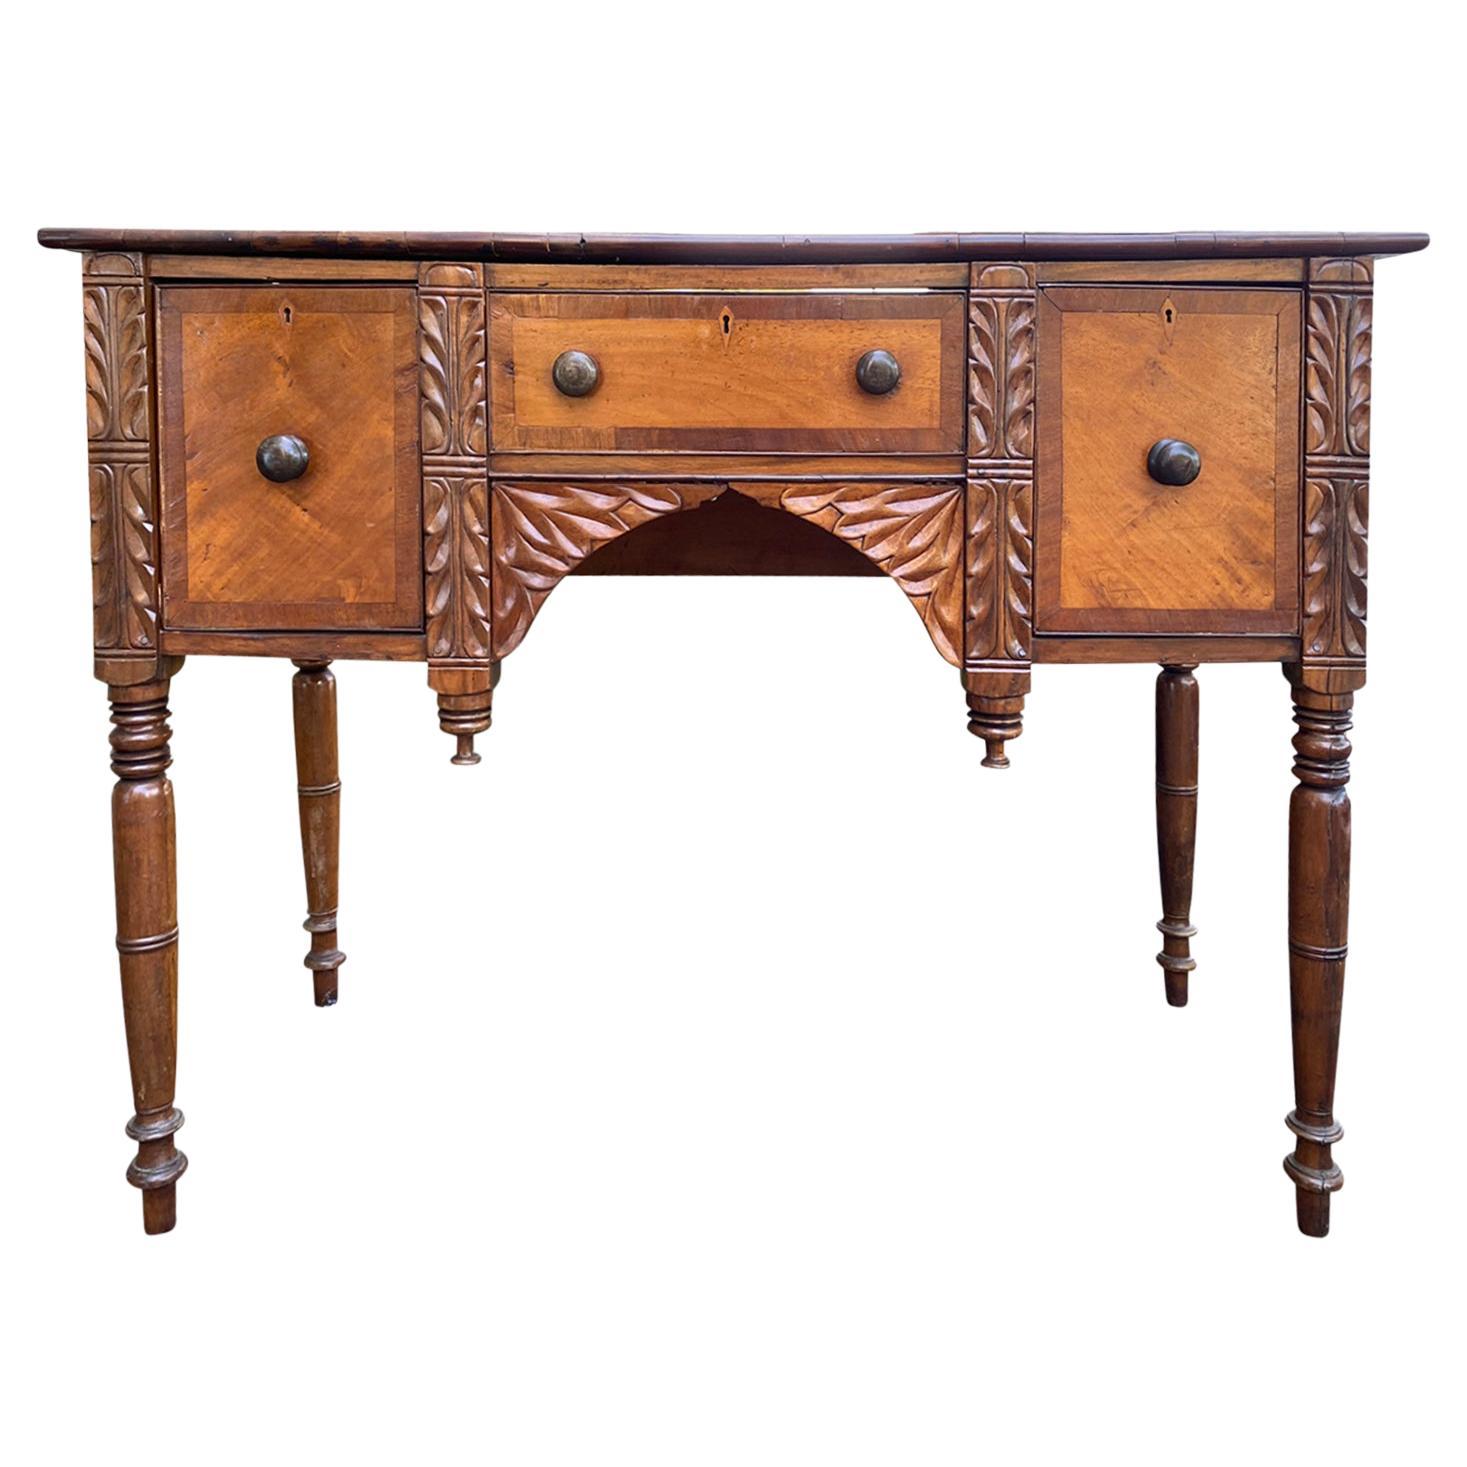 19th Century Anglo-Caribbean 'Poss. Jamaica or St Croix' Sideboard/ Brandy Board For Sale